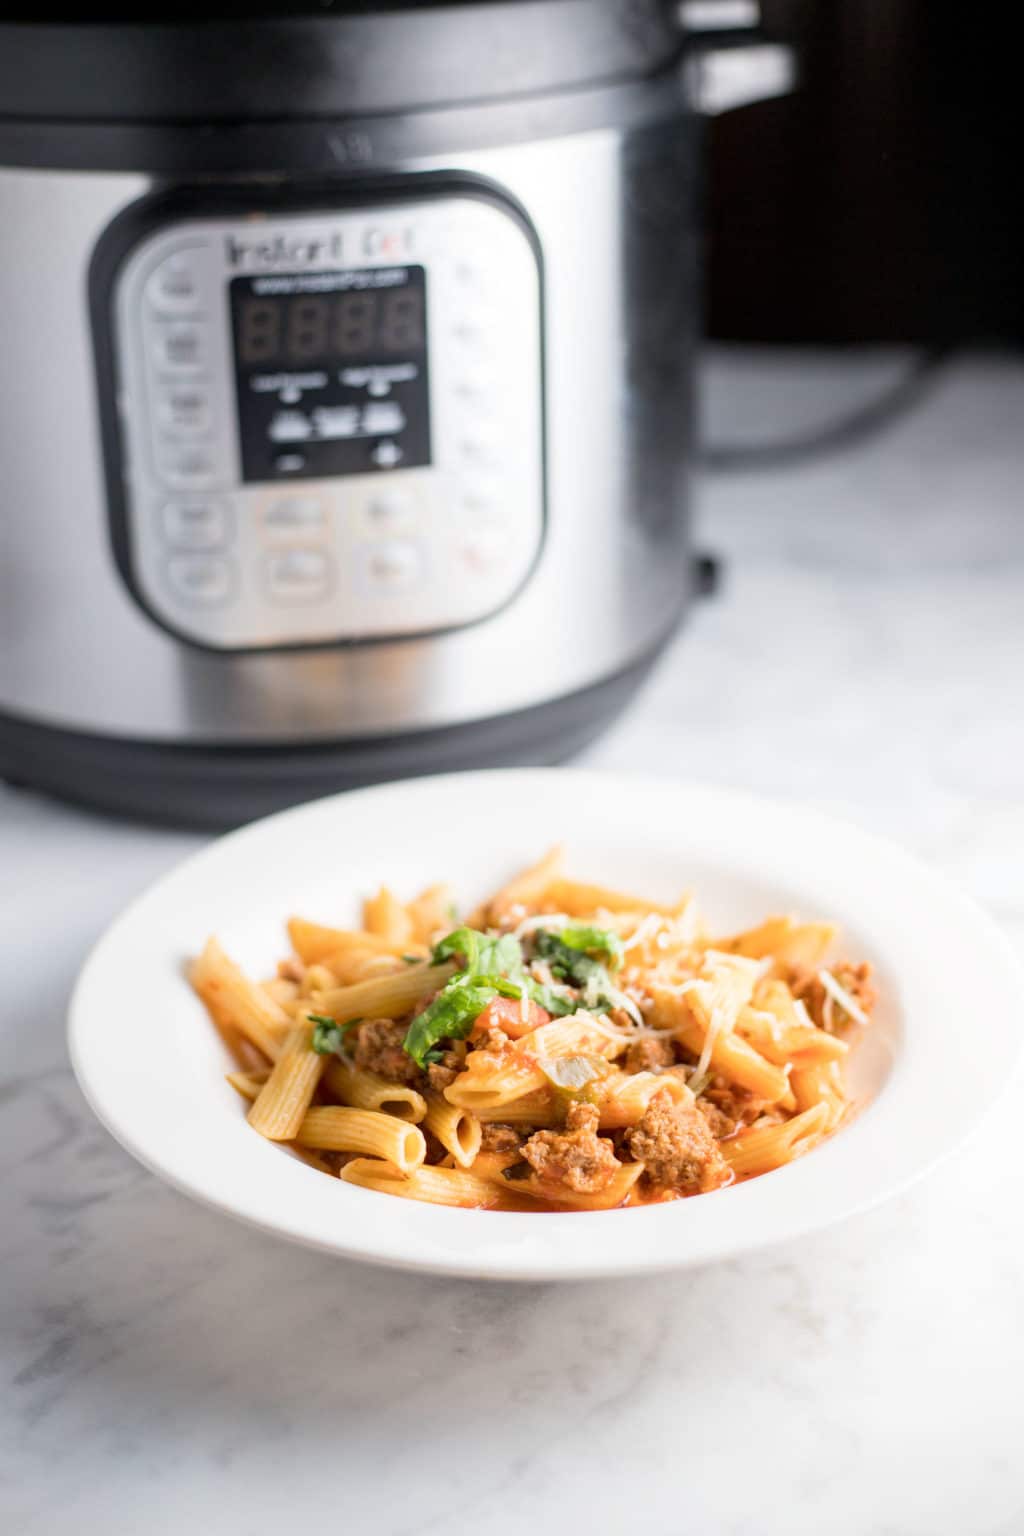 Instant Pot Penne with Turkey Sausage | Cookbooks and Coffee